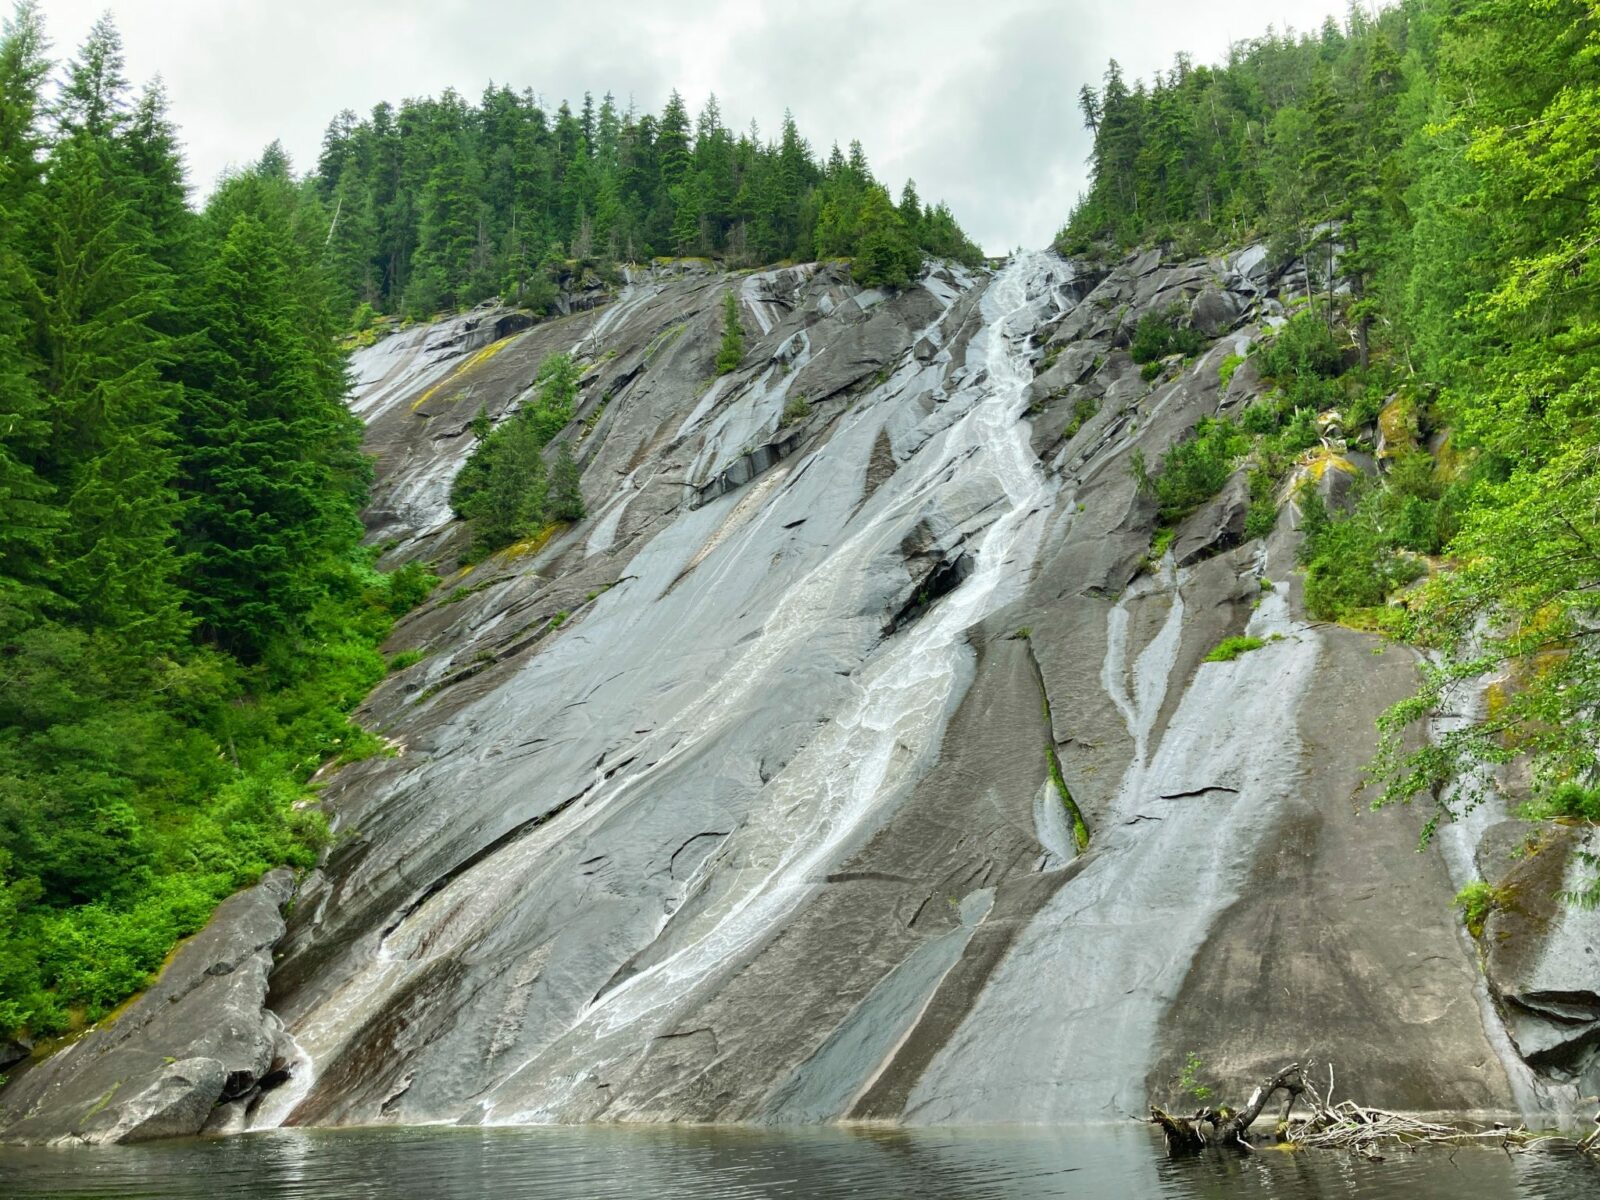 Otter Falls spills over a high rock and then spreads out over the flat surface of a rock next to a small lake. The giant rock face is surrounded by evergreen trees